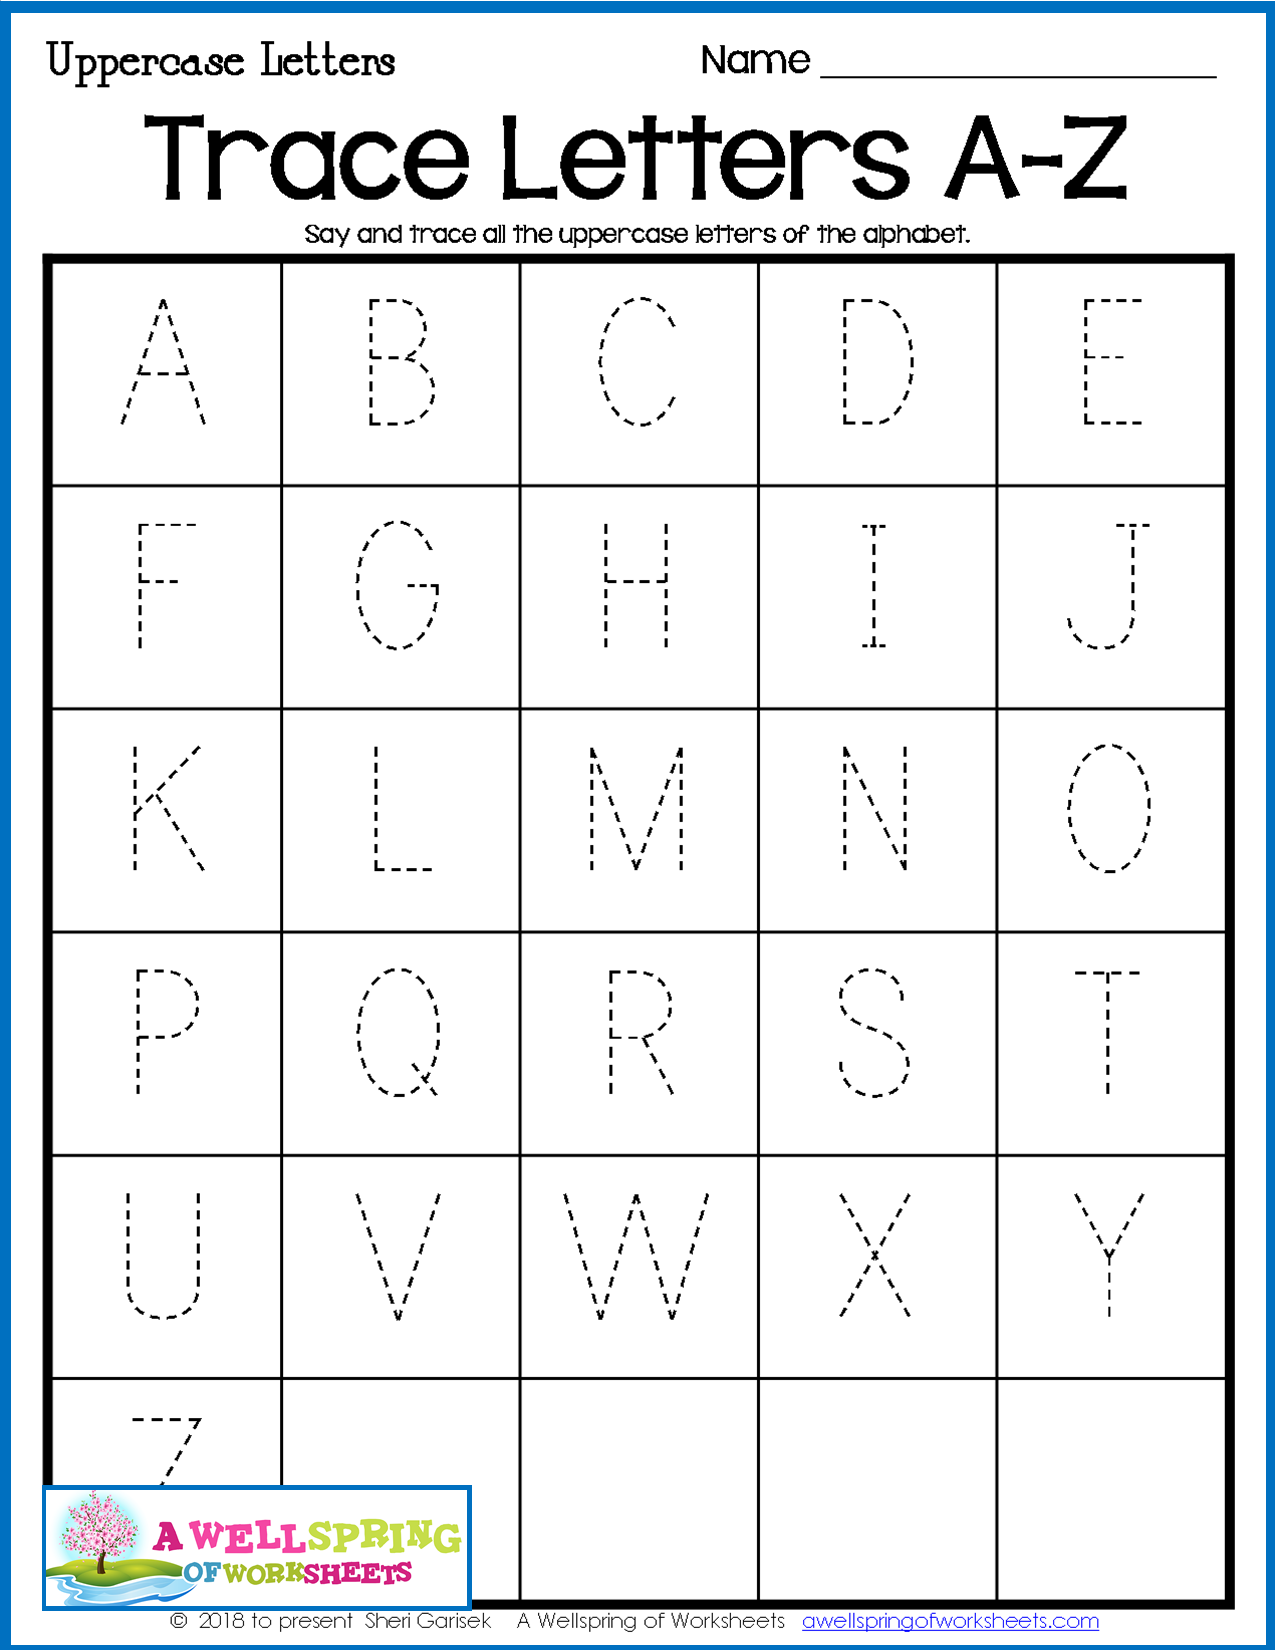 Free Uppercase And Lowercase Letter Tracing Worksheets ...